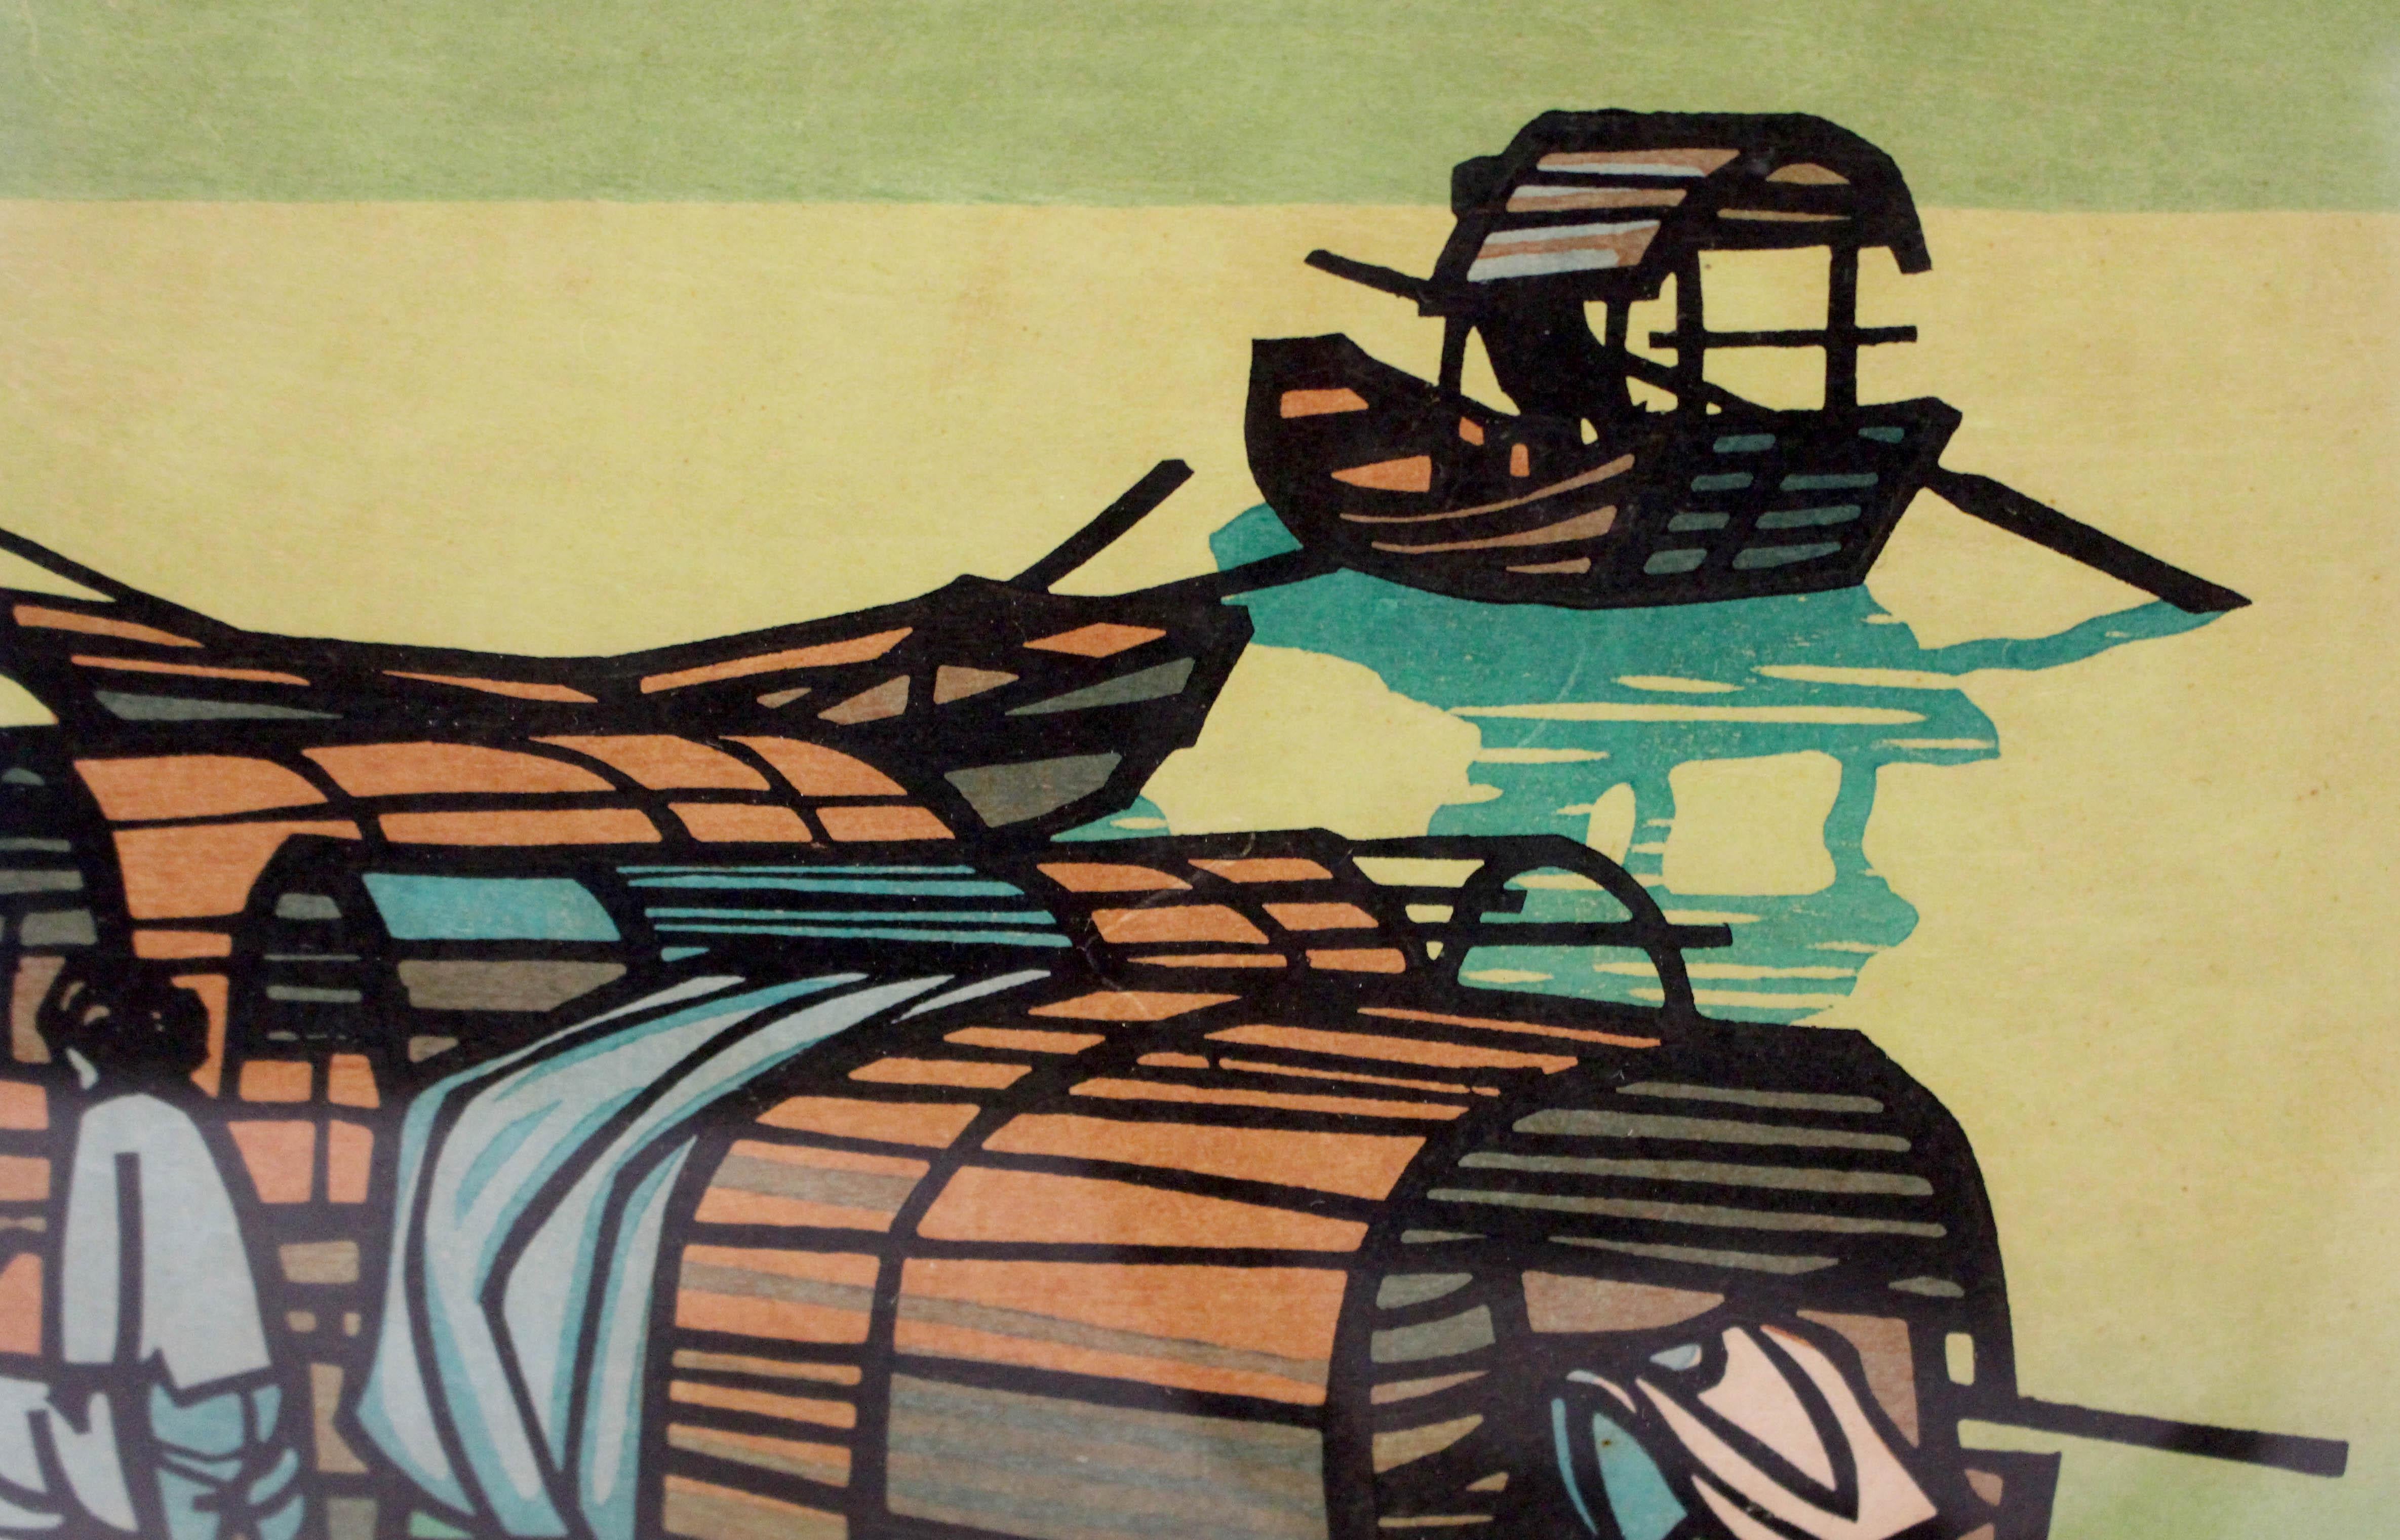 Hong Kong Boats II woodblock print by Clifton Karhu, 1969. #60/100, inscribed in pencil by the artist. American of Finnish heritage (1927-2007), Karhu settled in Japan after serving there in the war (returned as a missionary). Note on back: